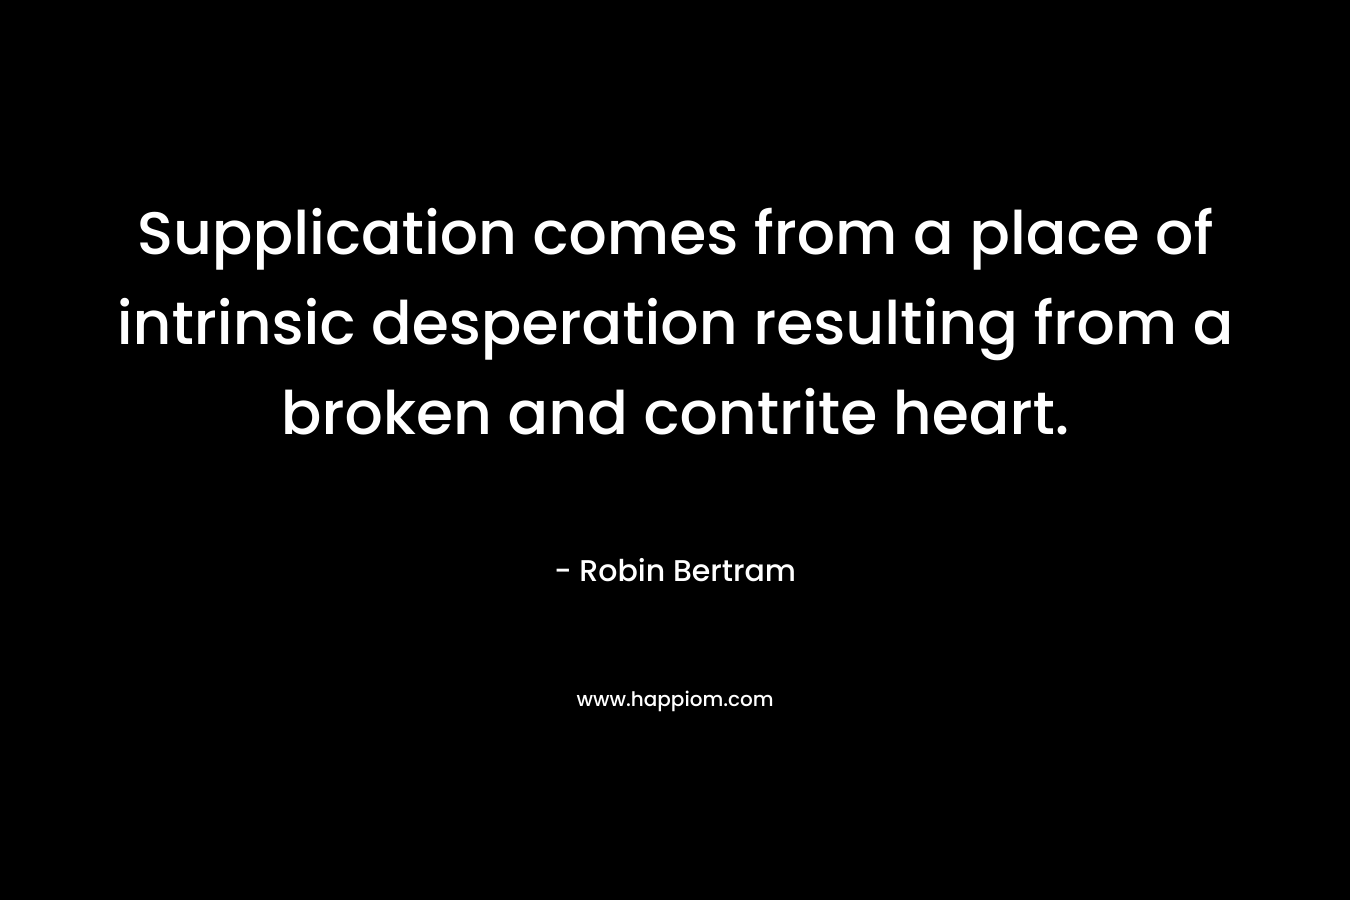 Supplication comes from a place of intrinsic desperation resulting from a broken and contrite heart. – Robin Bertram